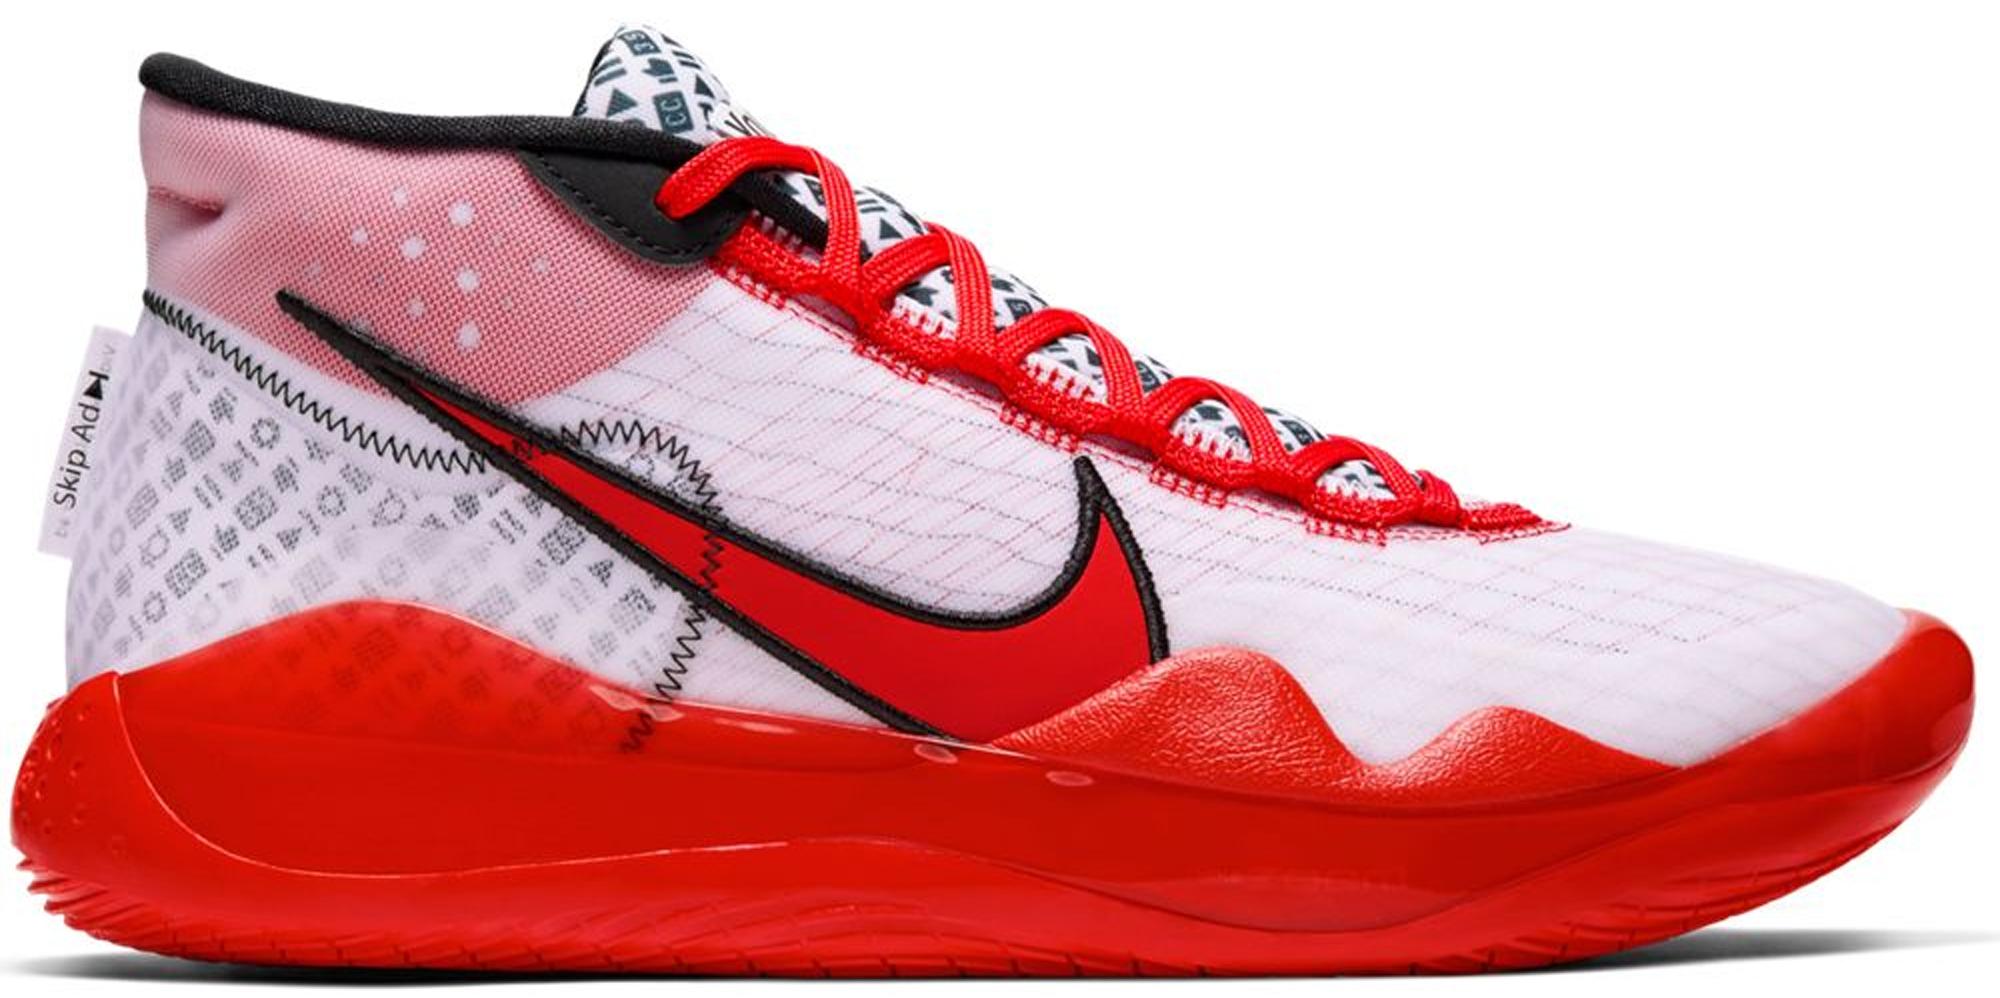 red kd 12